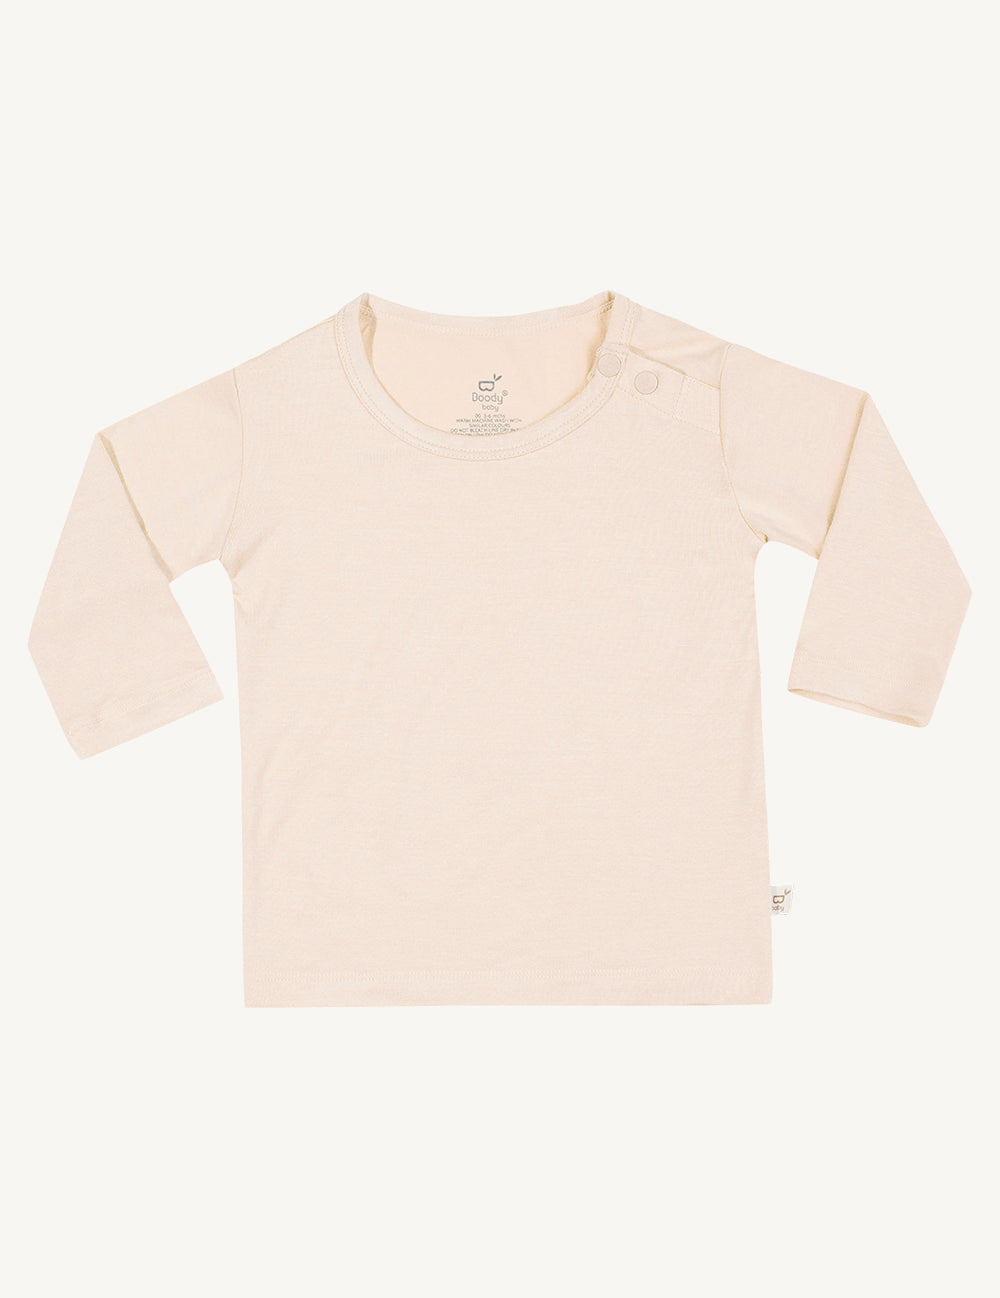 Baby Long Sleeve Top | Organic Baby Clothes | Boody